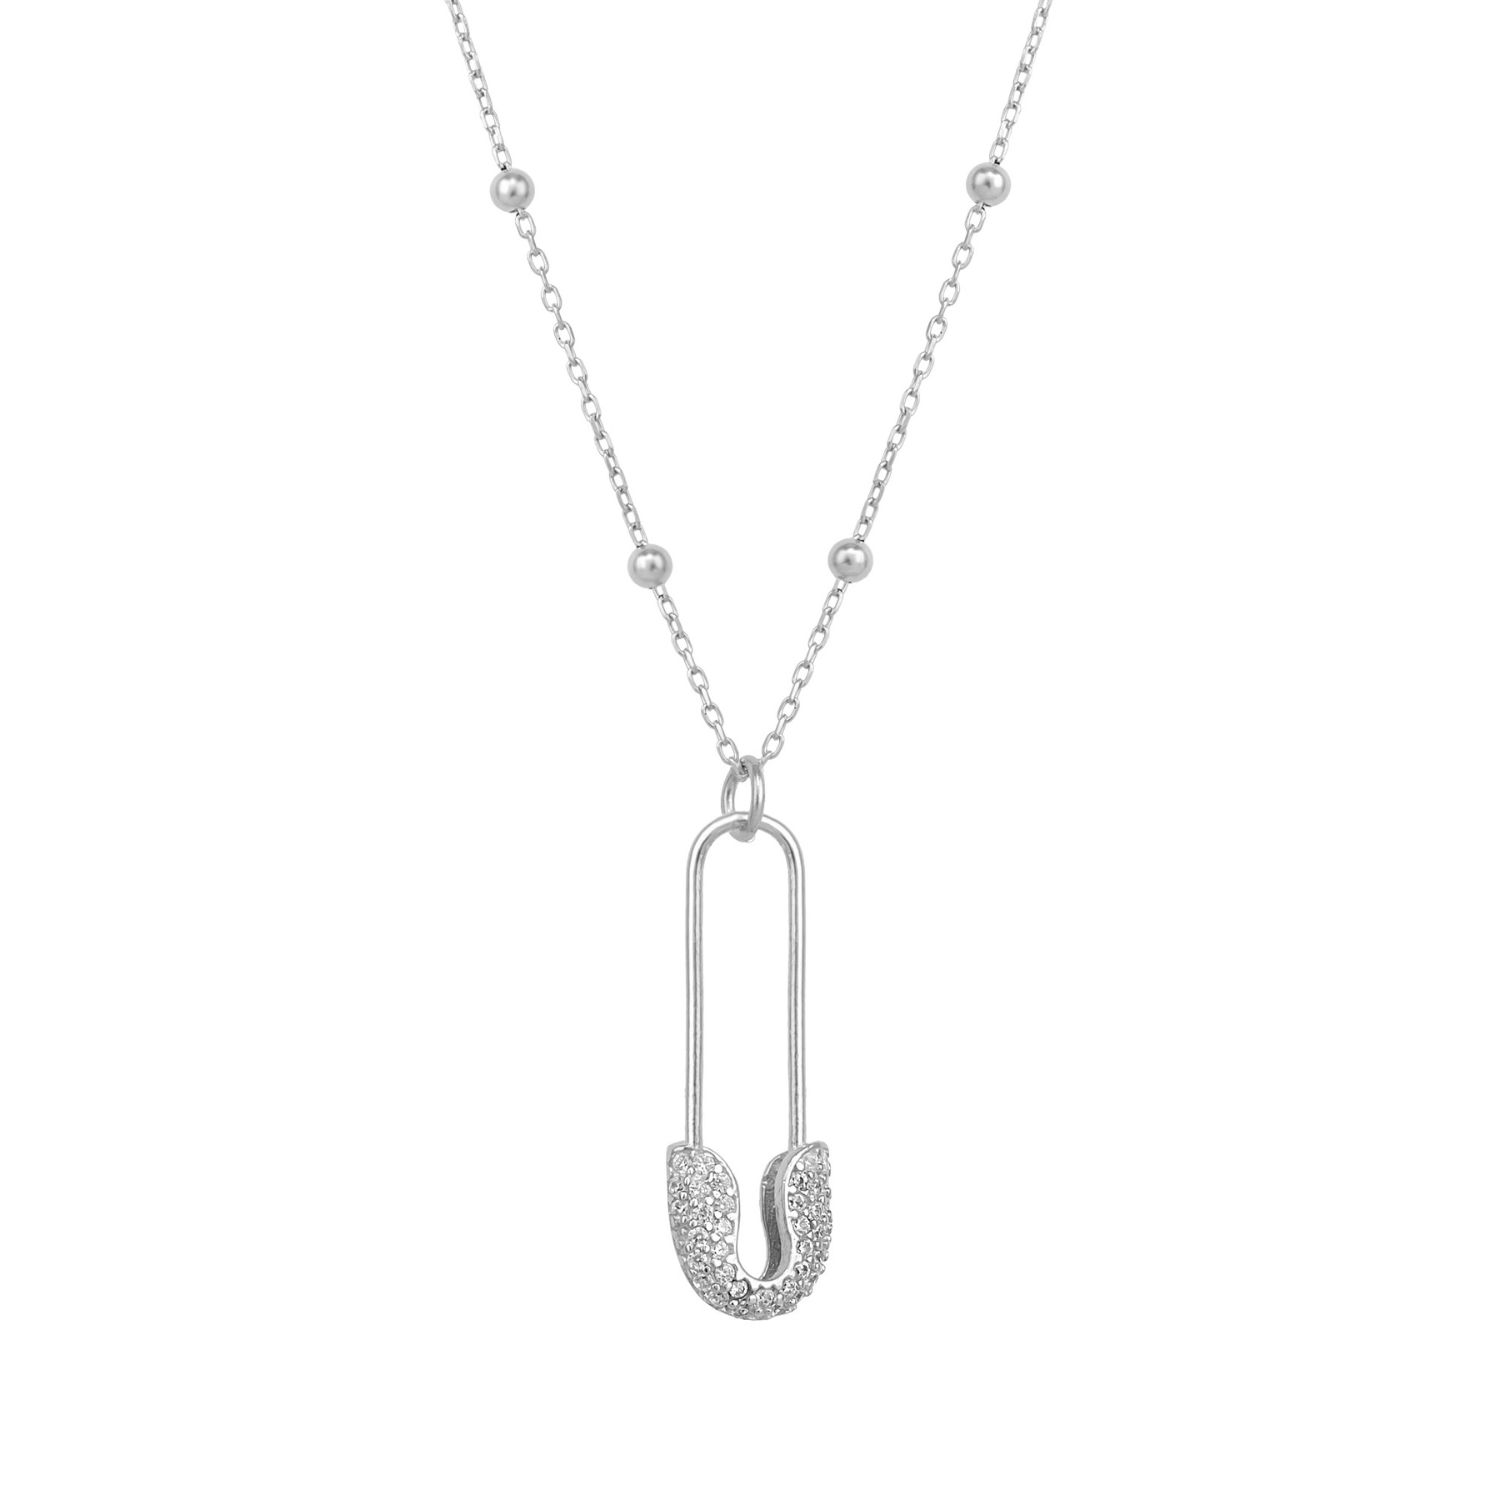 Women’s Pave Safety Pin Necklace Jewelled With Beaded Chain In Sterling Silver - Silver Spero London